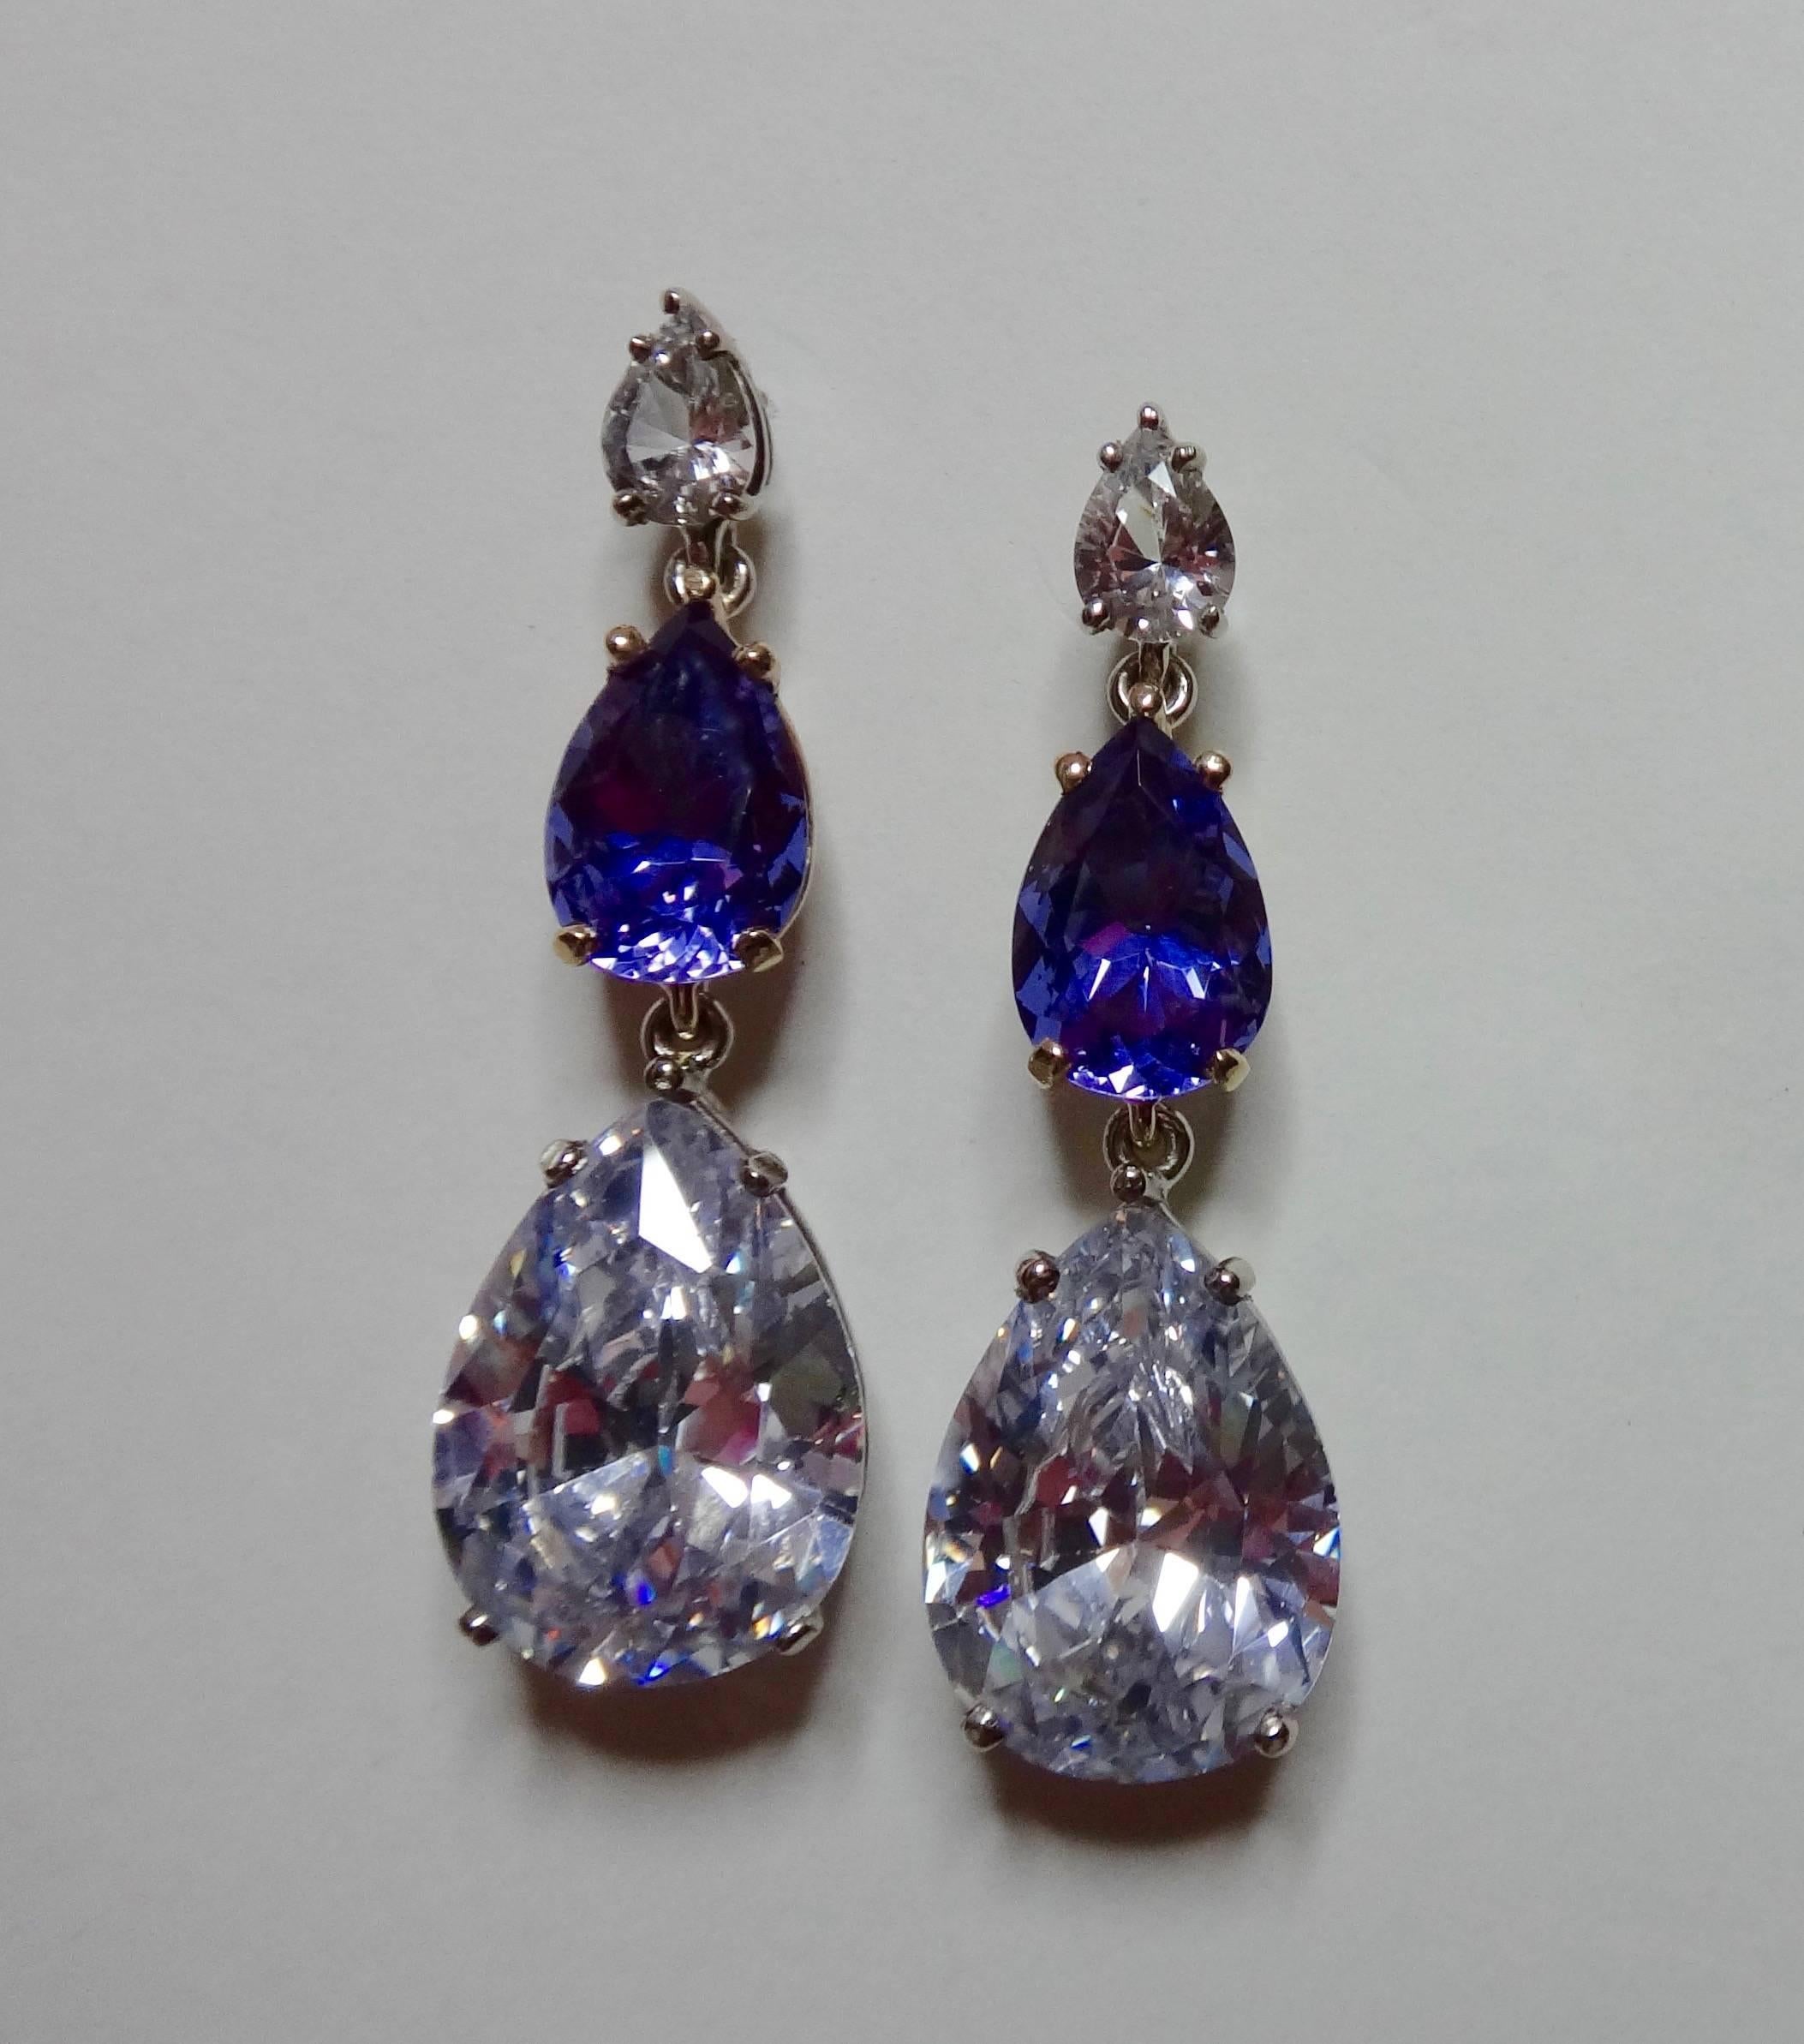 Three pear shaped gems consisting of silver sapphire, color change zultanite (mineral diaspore found in the Ilbir Mountains of southwest Turkey) and platinum topaz create these dangle earrings.  All set in two tone, handmade settings.  Post with